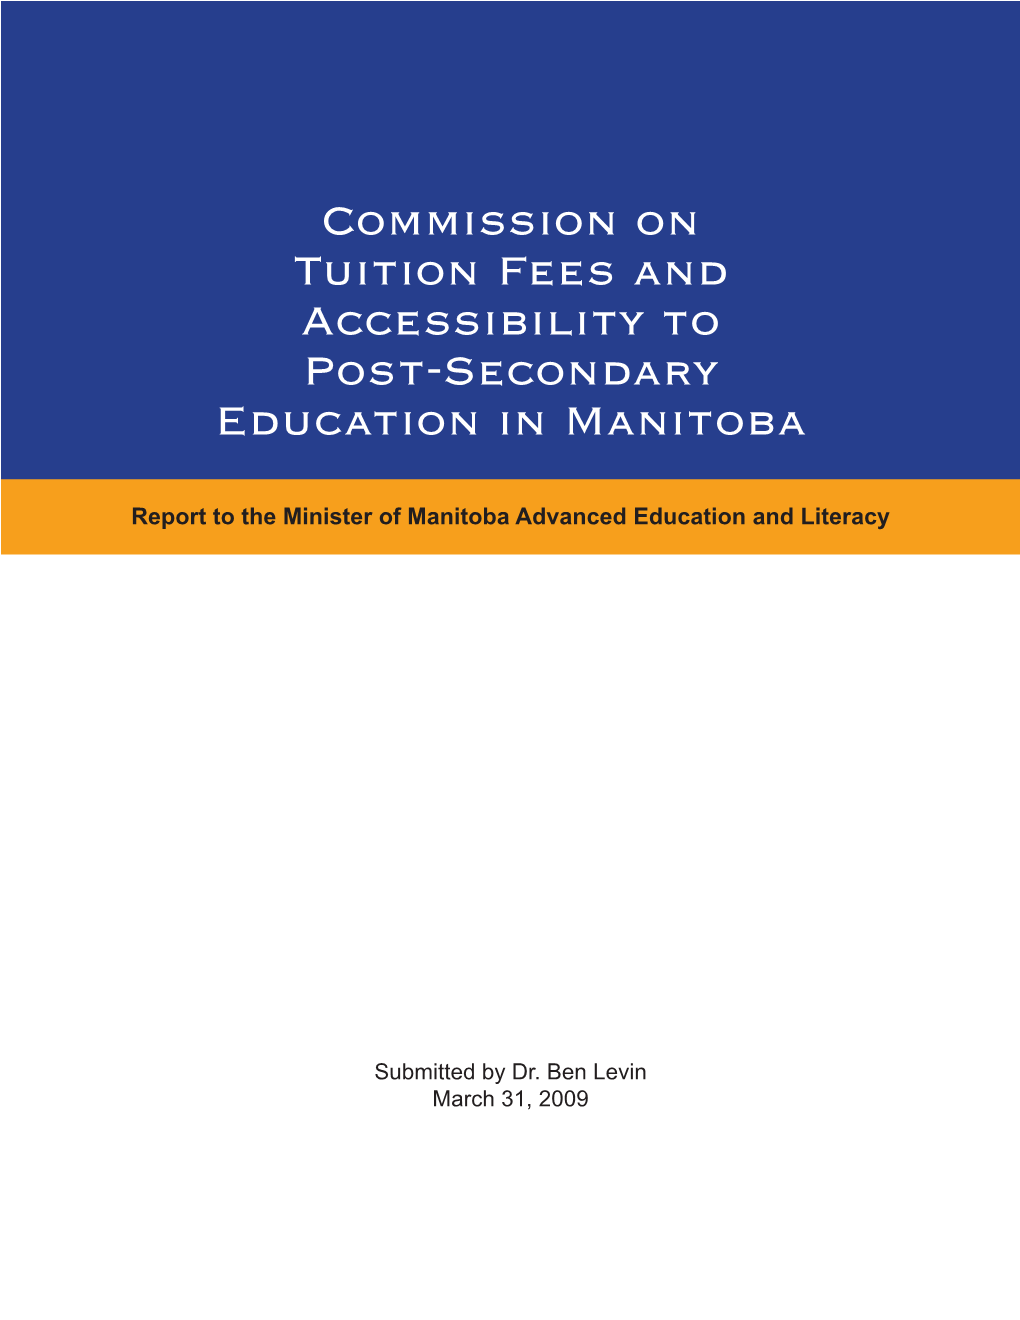 Commission on Tuition Fees and Accessibility to Post-Secondary Education in Manitoba